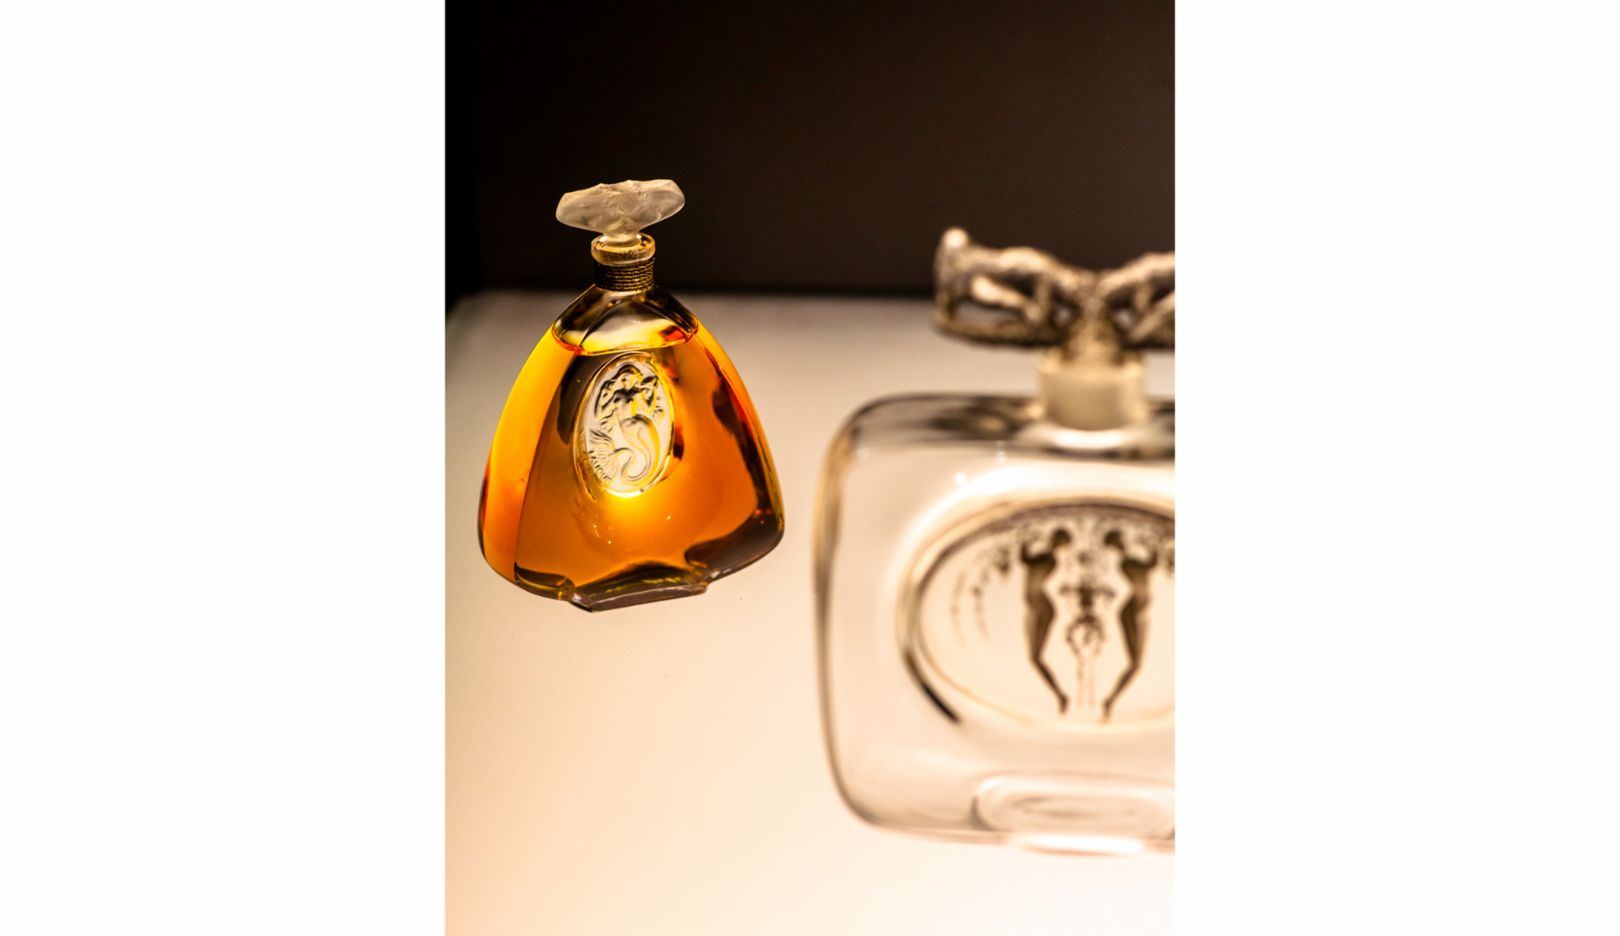 René Lalique created the motif of the bottle on the left as early as 1912, but it was not until 1934 that the mermaid became established. Here, La Sirène adorns a Brumann brand flacon. 